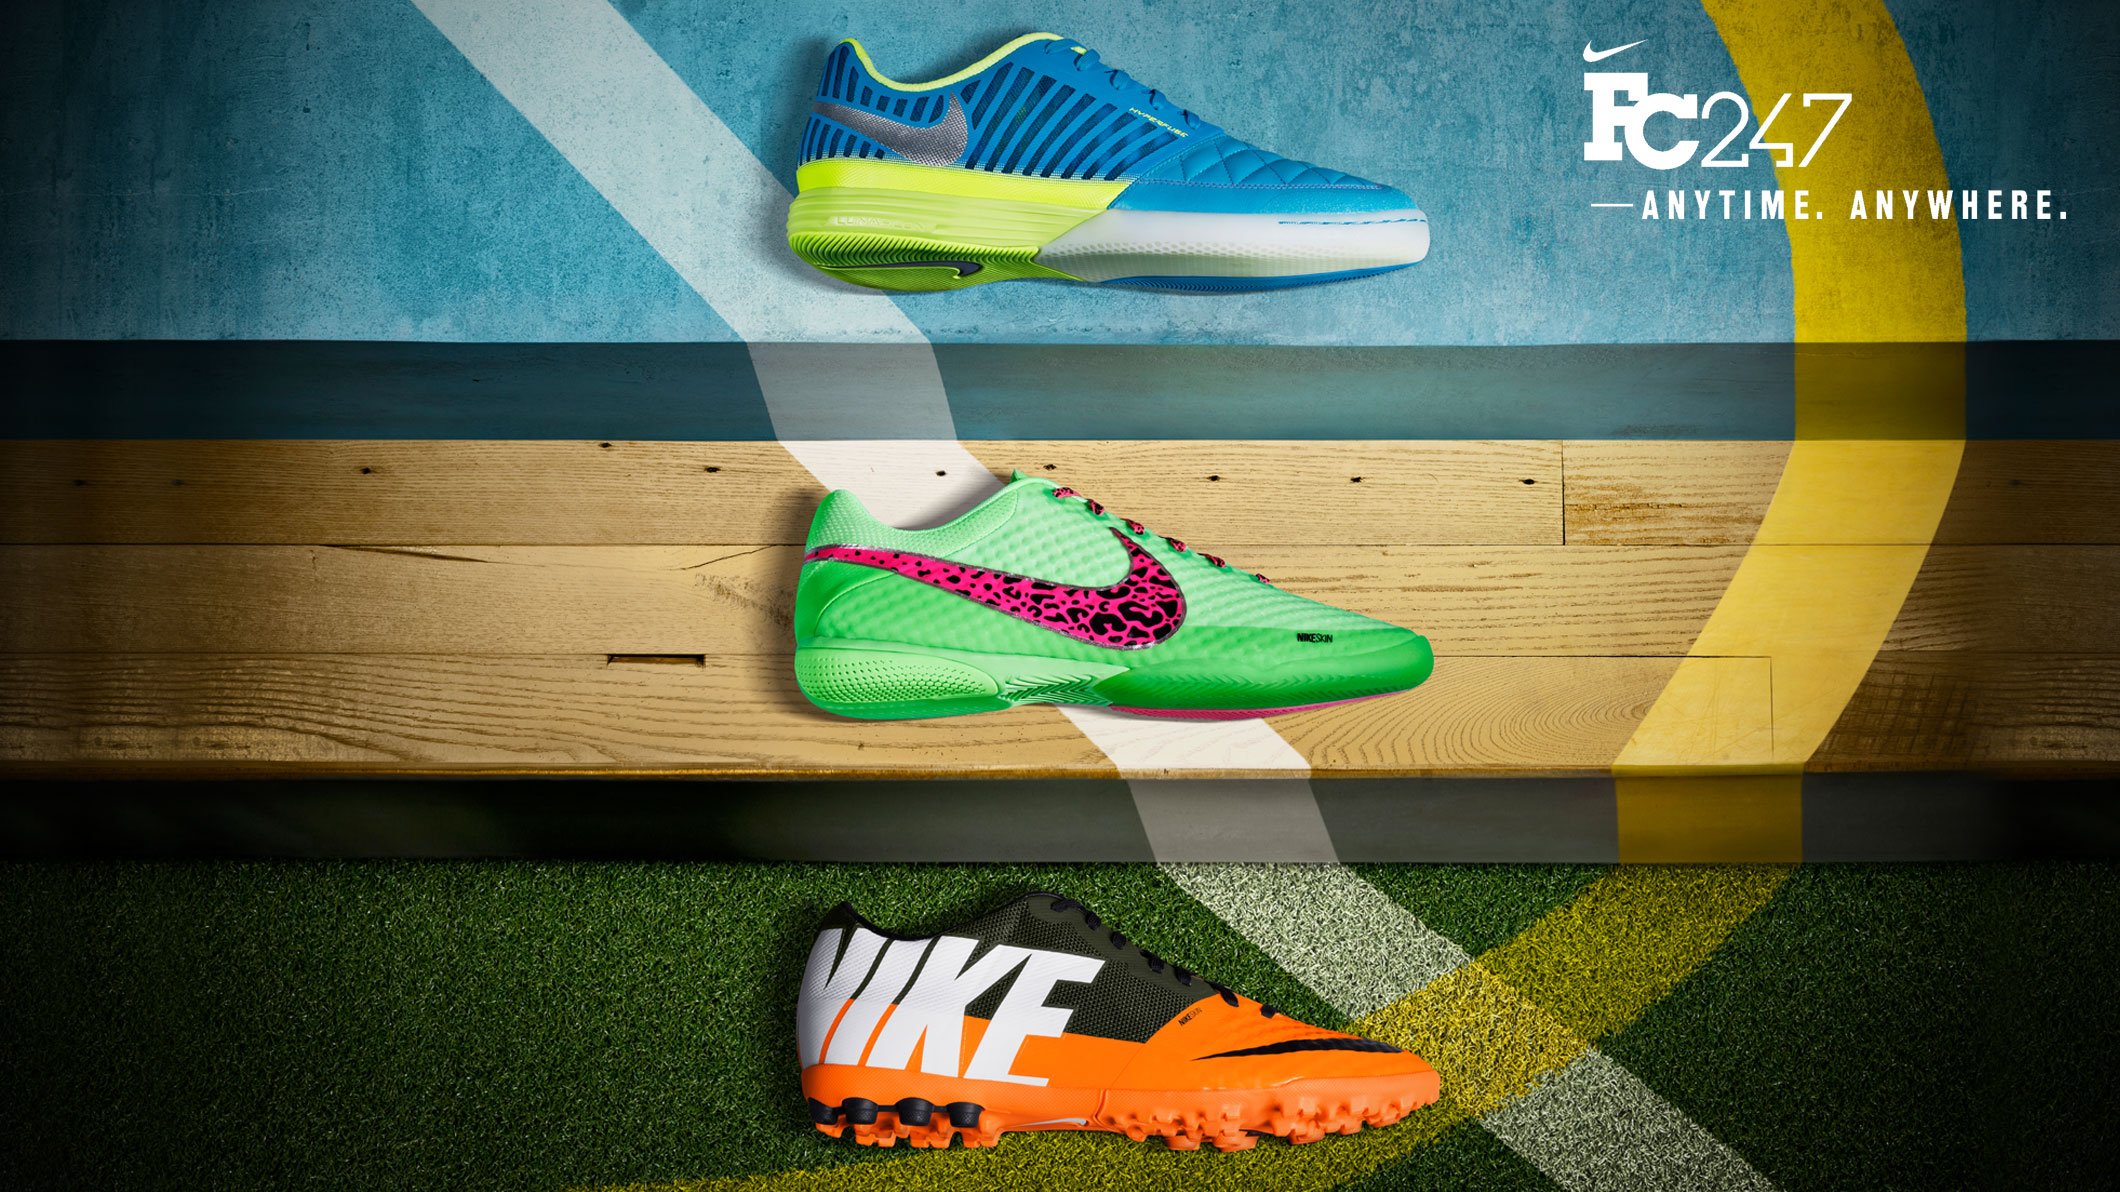 Nike Release the FC247 Collection, Update Nike5 Elastico, Bomba, and Lunar Gato